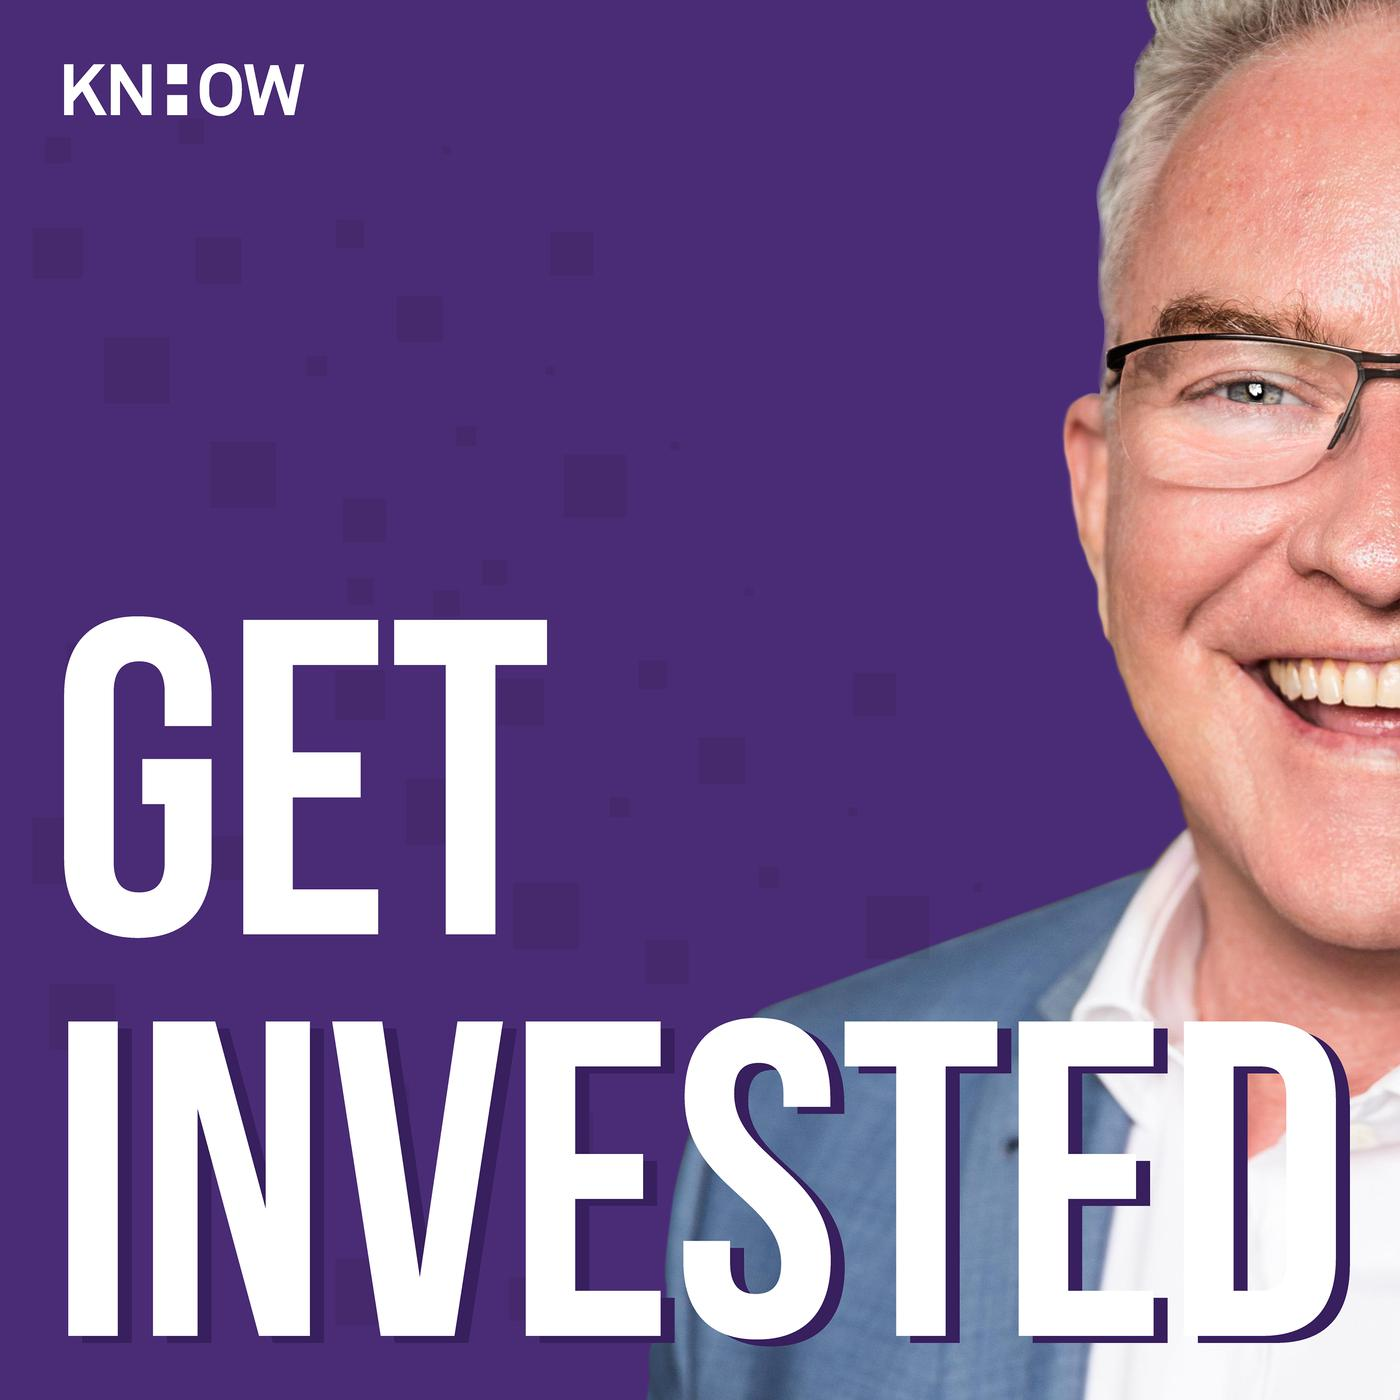 Get Invested: Your Property Hub Collective Future with Kevin Turner, Eddie the Frenchman, Rasti Vaibhav and Bushy Martin